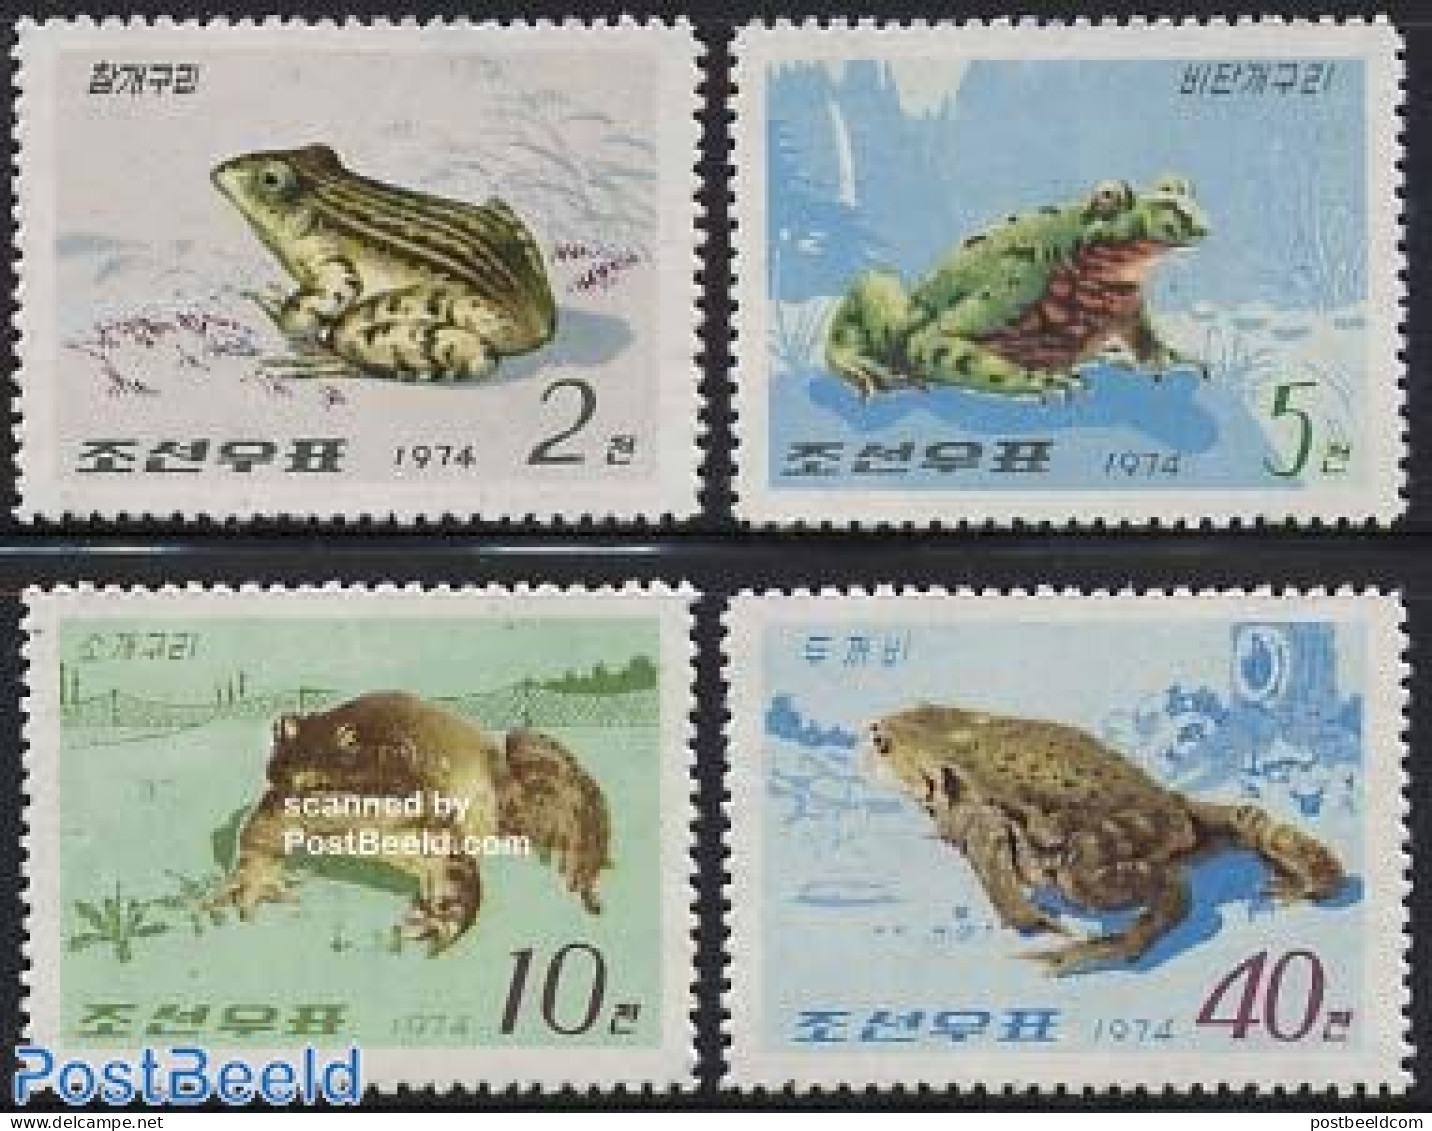 Korea, North 1974 Frogs 4v, Mint NH, Nature - Frogs & Toads - Reptiles - Corée Du Nord